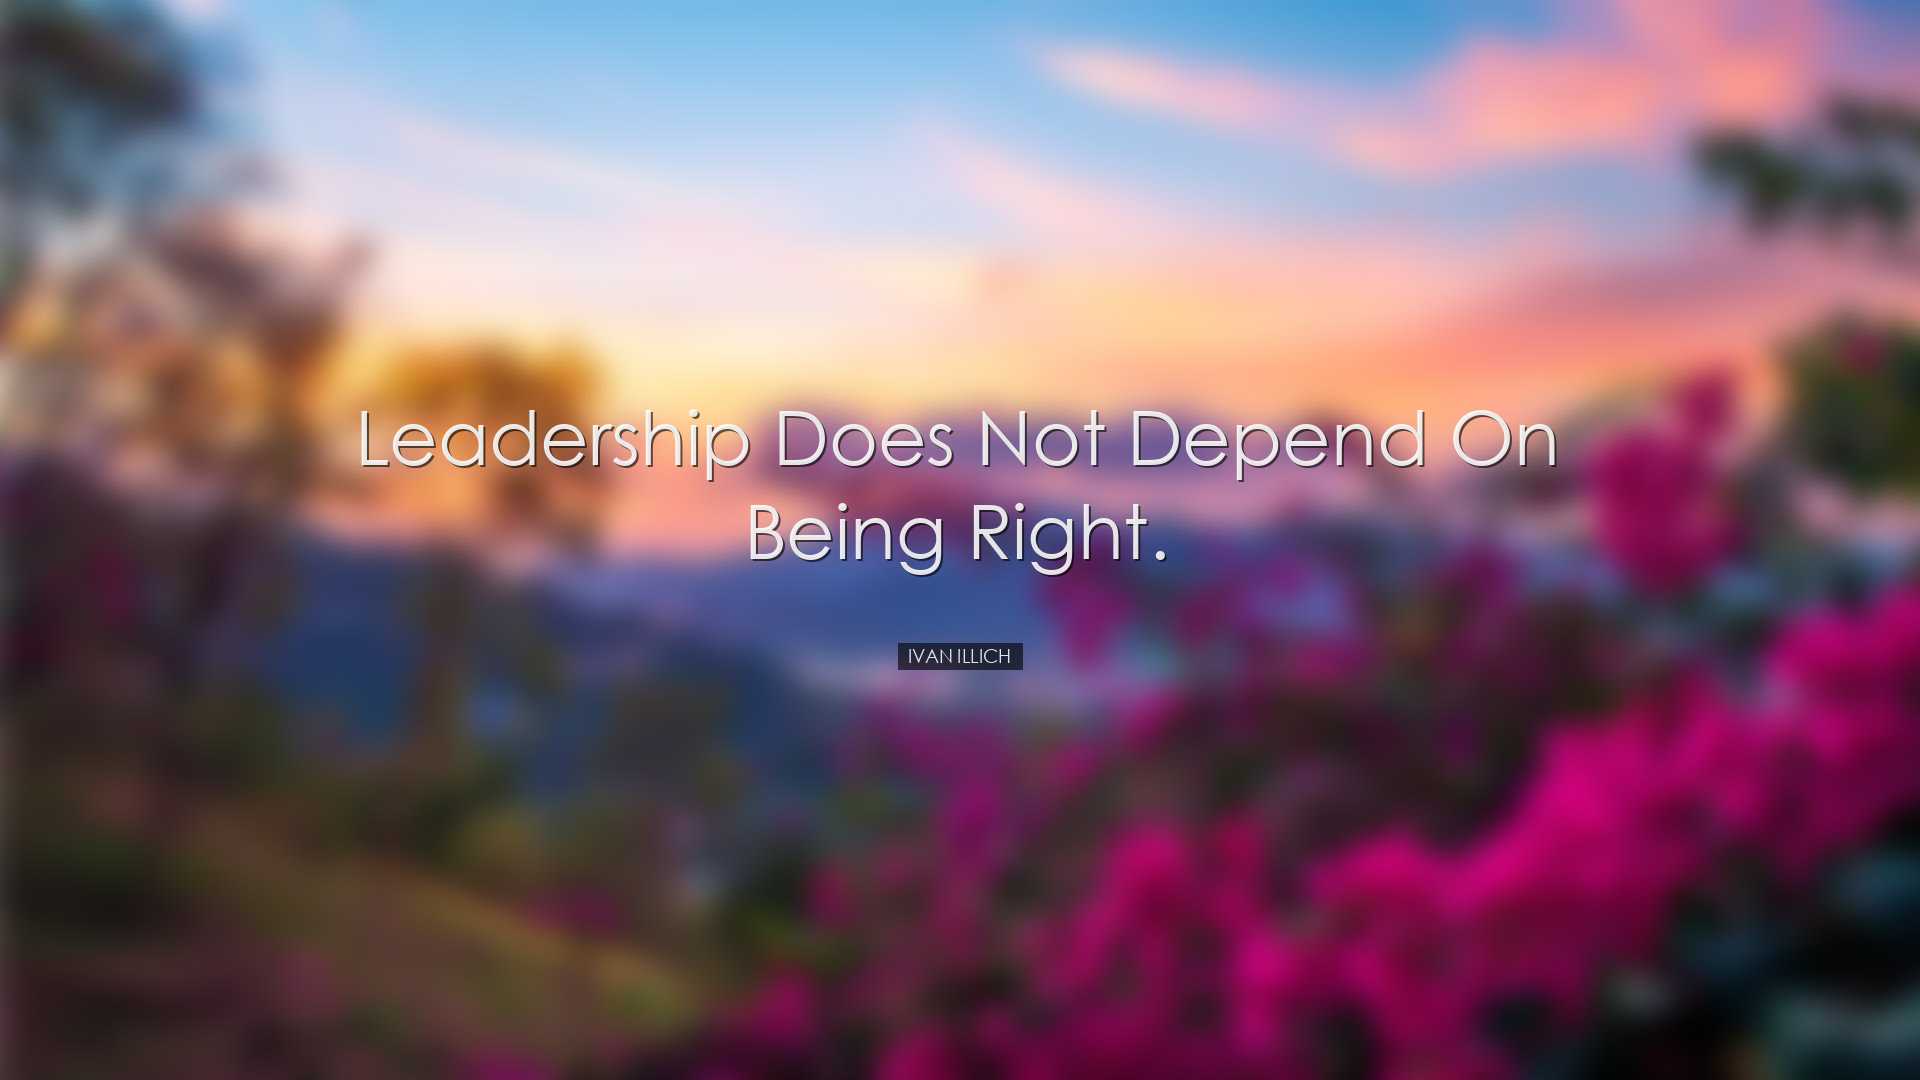 Leadership does not depend on being right. - Ivan Illich